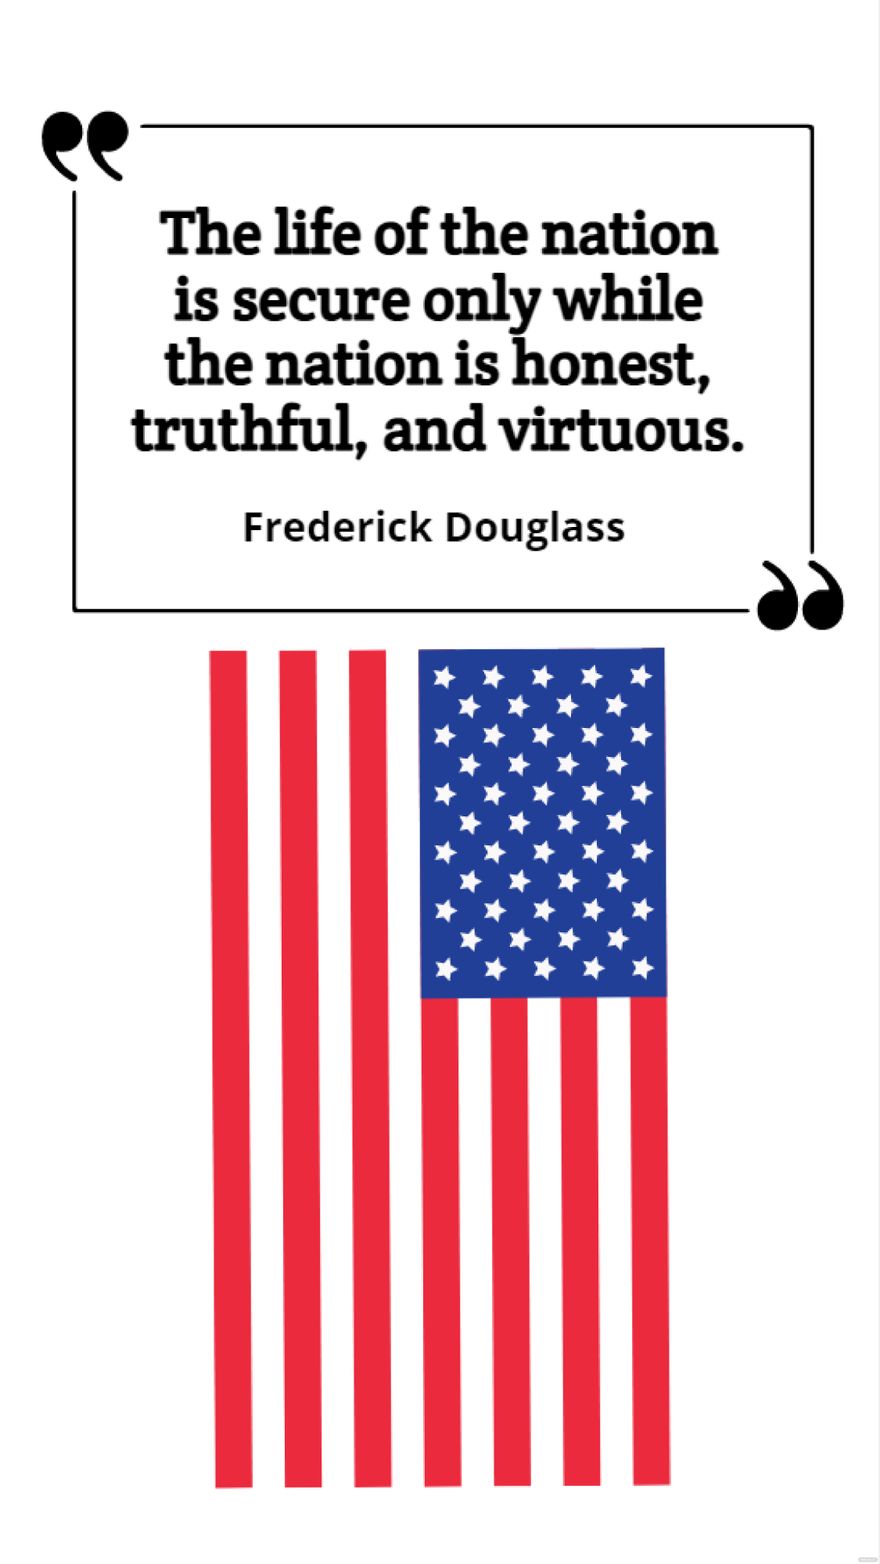 Free Frederick Douglass - The life of the nation is secure only while the nation is honest, truthful, and virtuous.